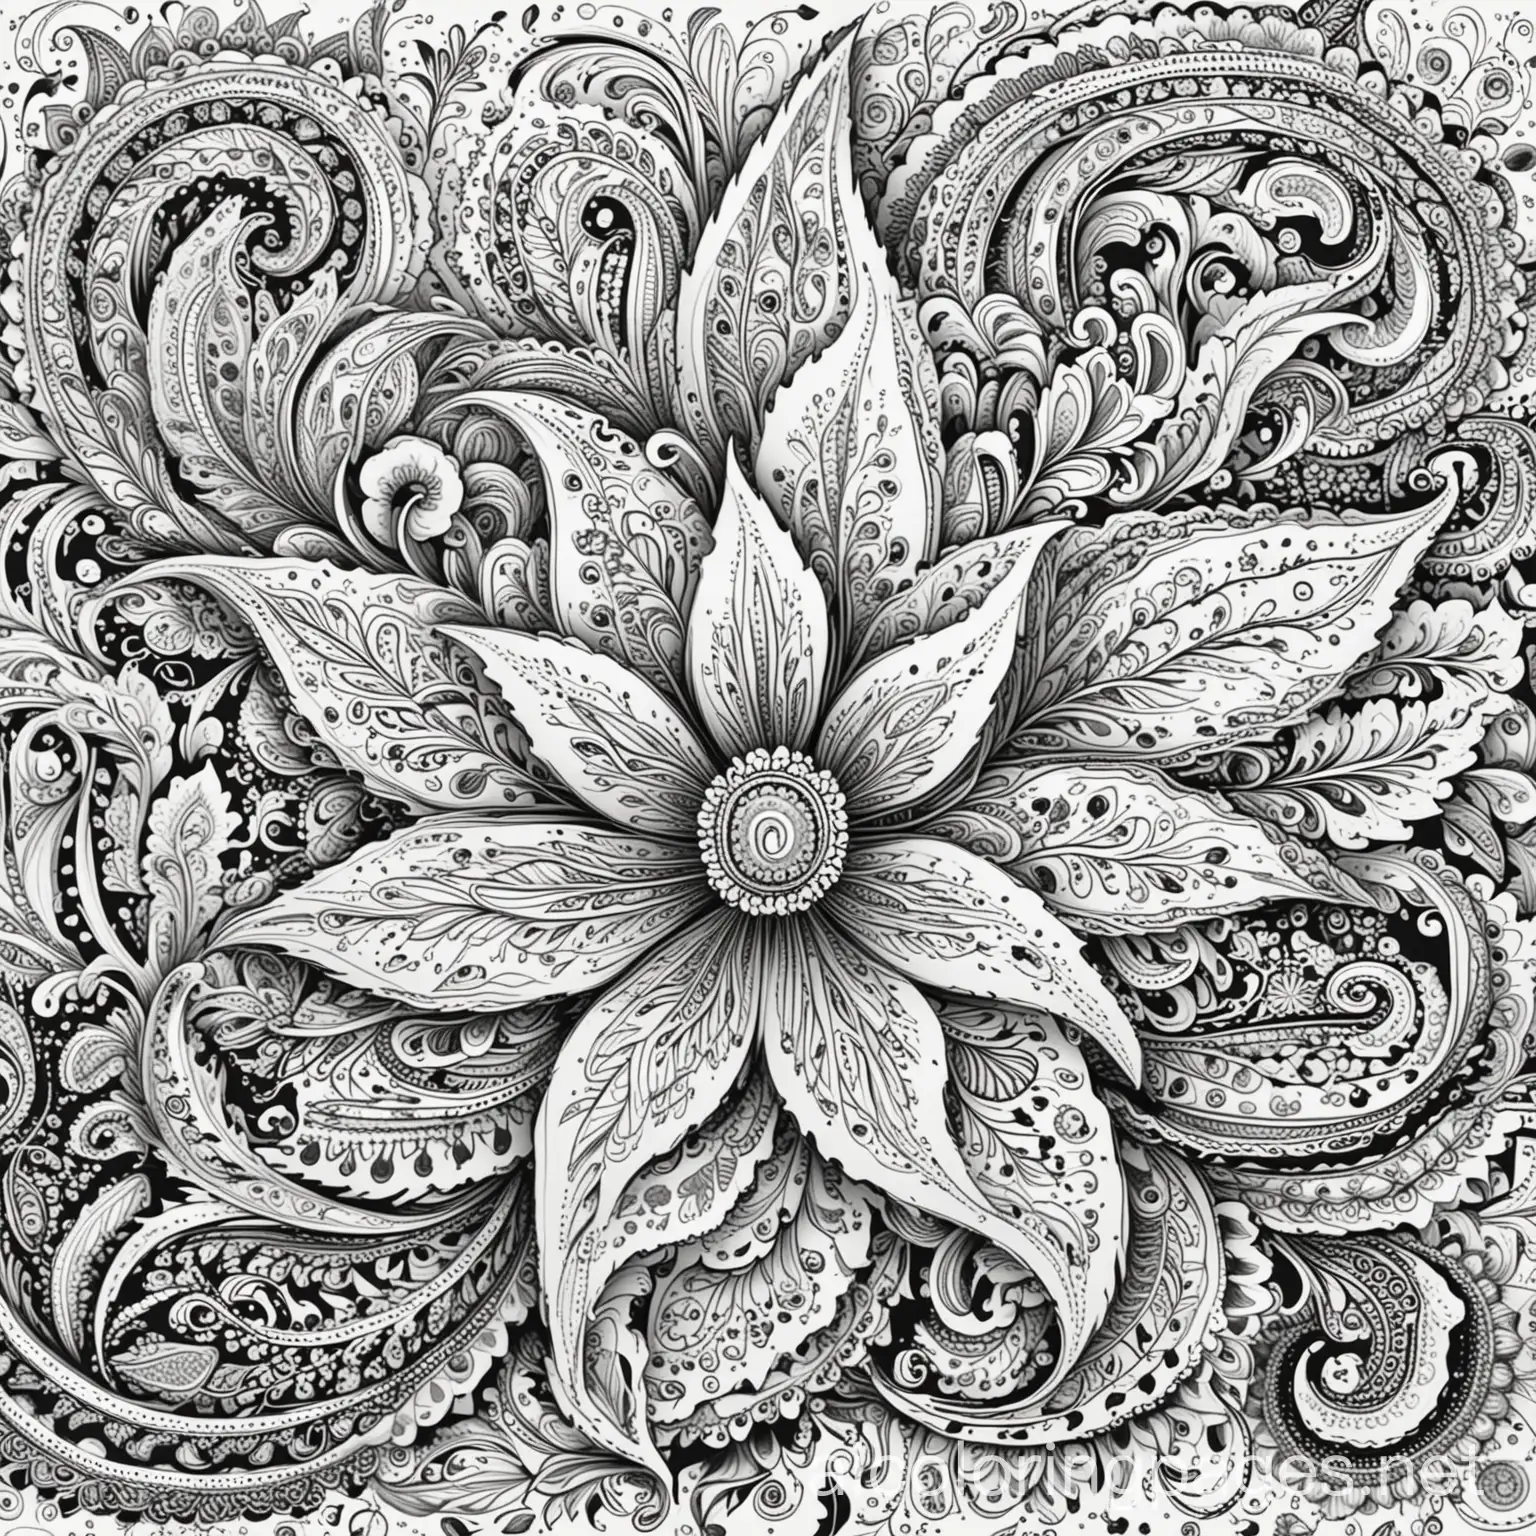 Beautiful flower with detailed paisley design inside, white background, clear crisp lines, no grayscale, no shadows, no shading, Coloring Page, black and white, line art, white background, Simplicity, Ample White Space. The background of the coloring page is plain white to make it easy for young children to color within the lines. The outlines of all the subjects are easy to distinguish, making it simple for kids to color without too much difficulty